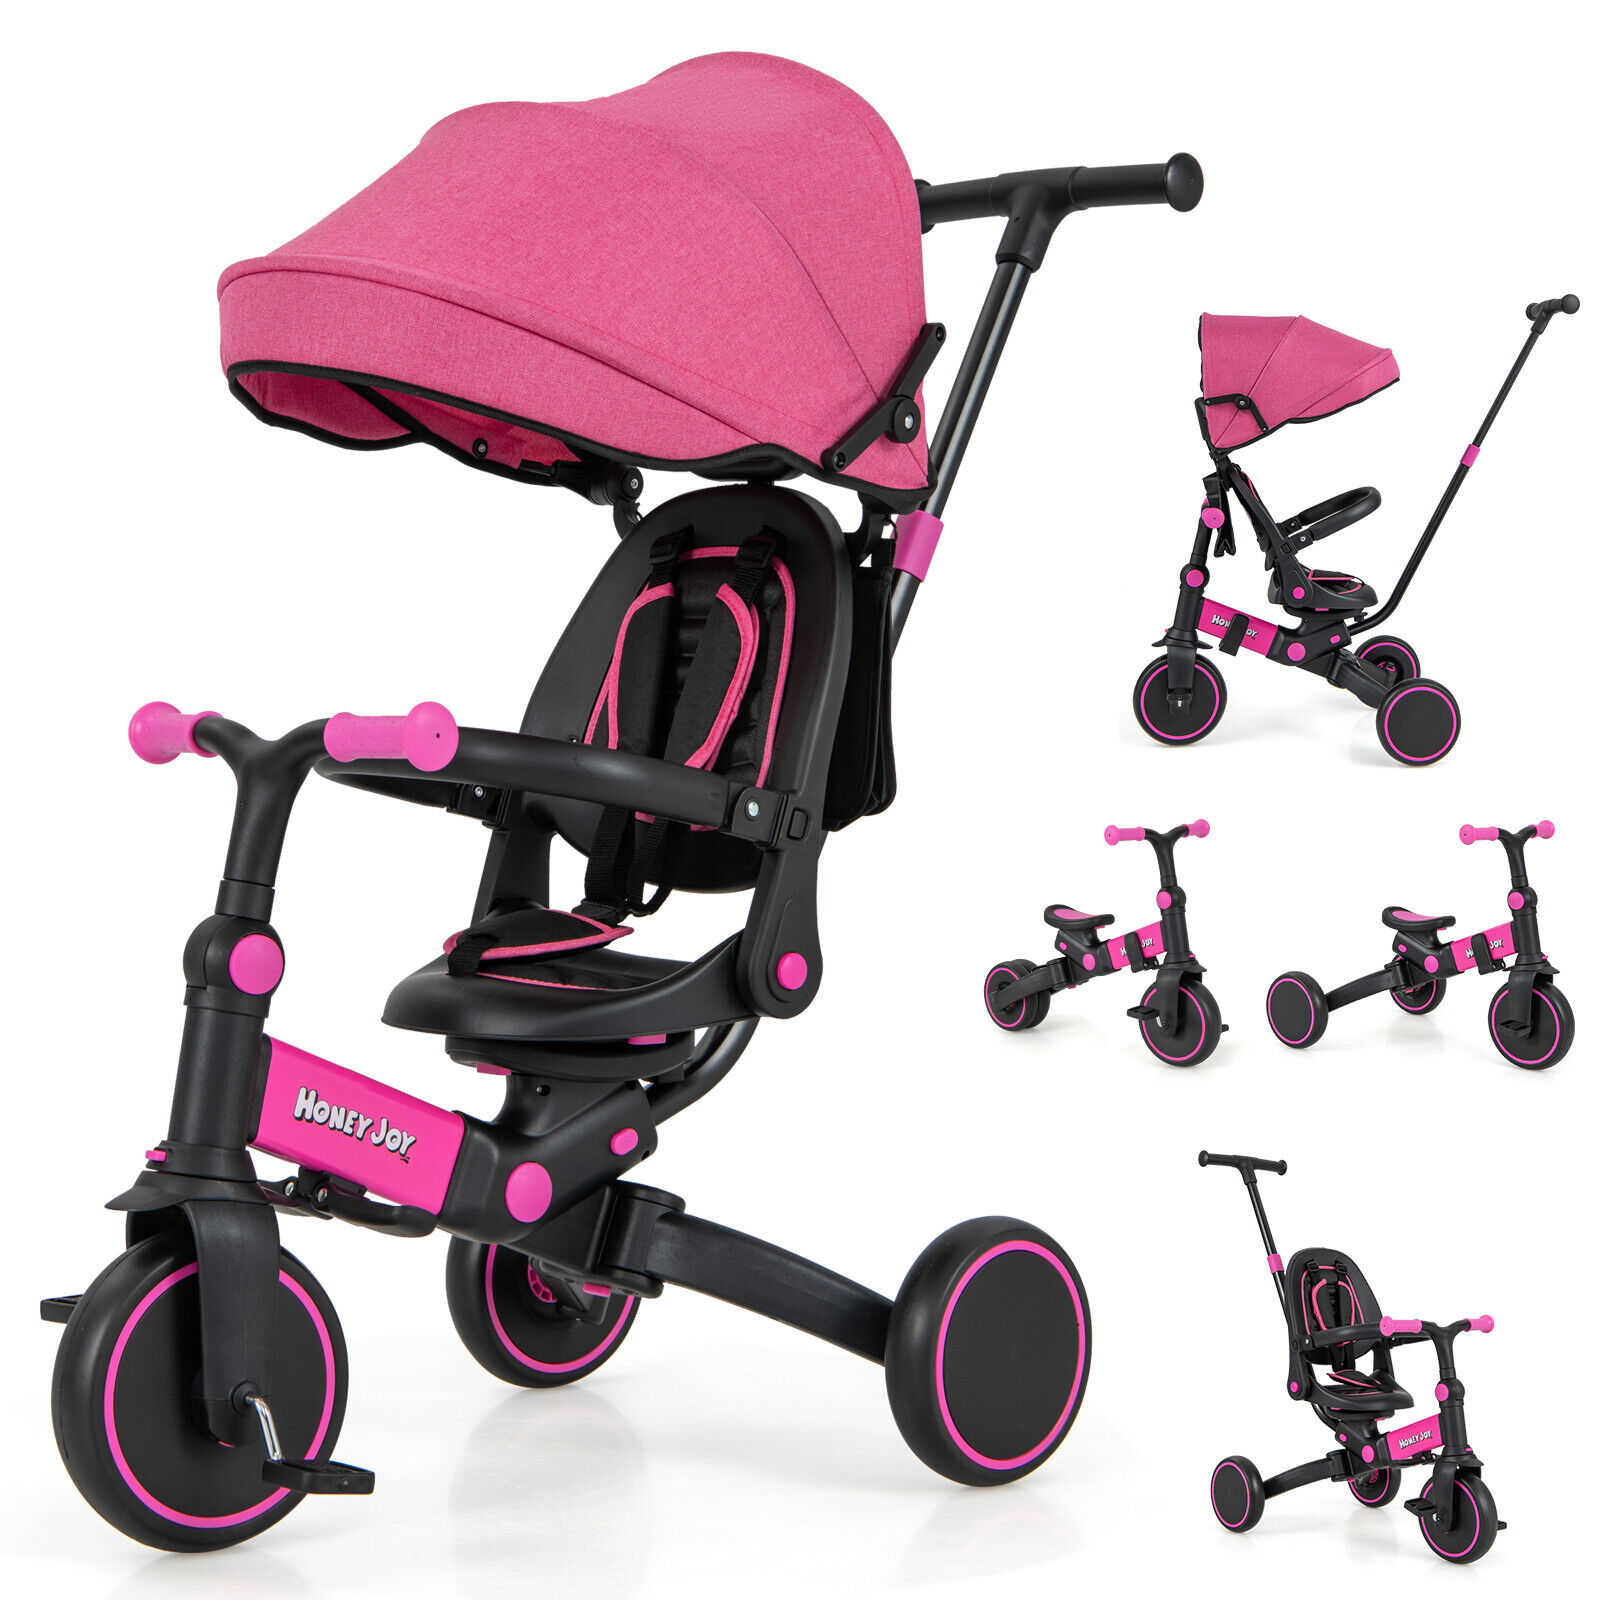 Great Choice Products Tricycle For Toddlers 8-In-1 Folding Trike For 12-72 Months Old Toddlers Pink